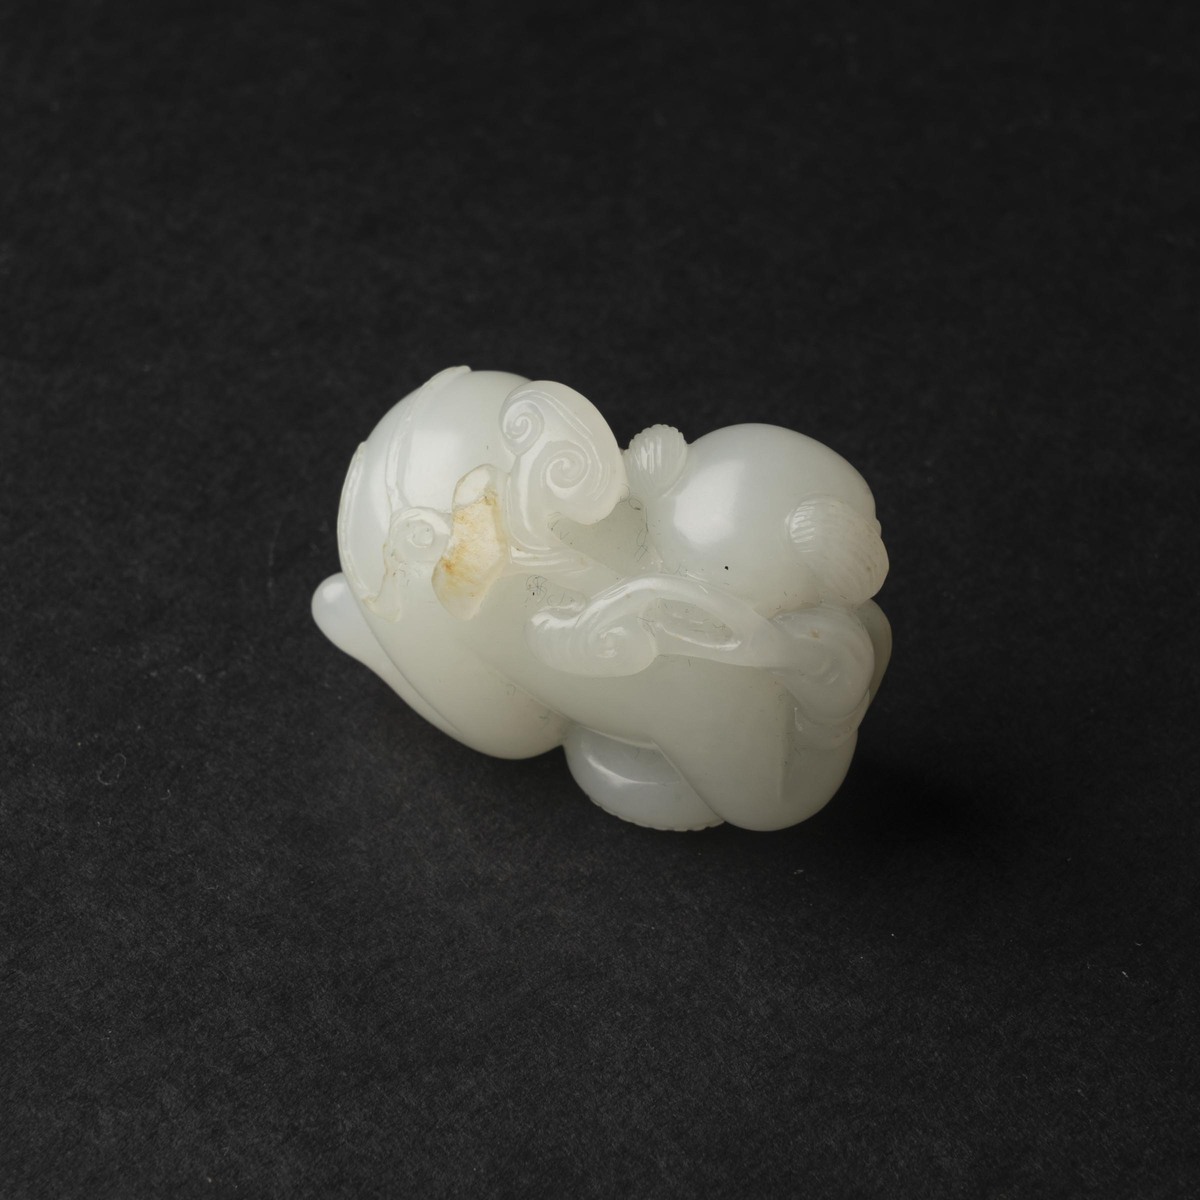 A Fine White Jade 'Boy and Lingzhi' Carving, Qing Dynasty, 18th Century, 清 十八世纪 白玉雕'连生贵子'坠, length 1 - Image 4 of 7